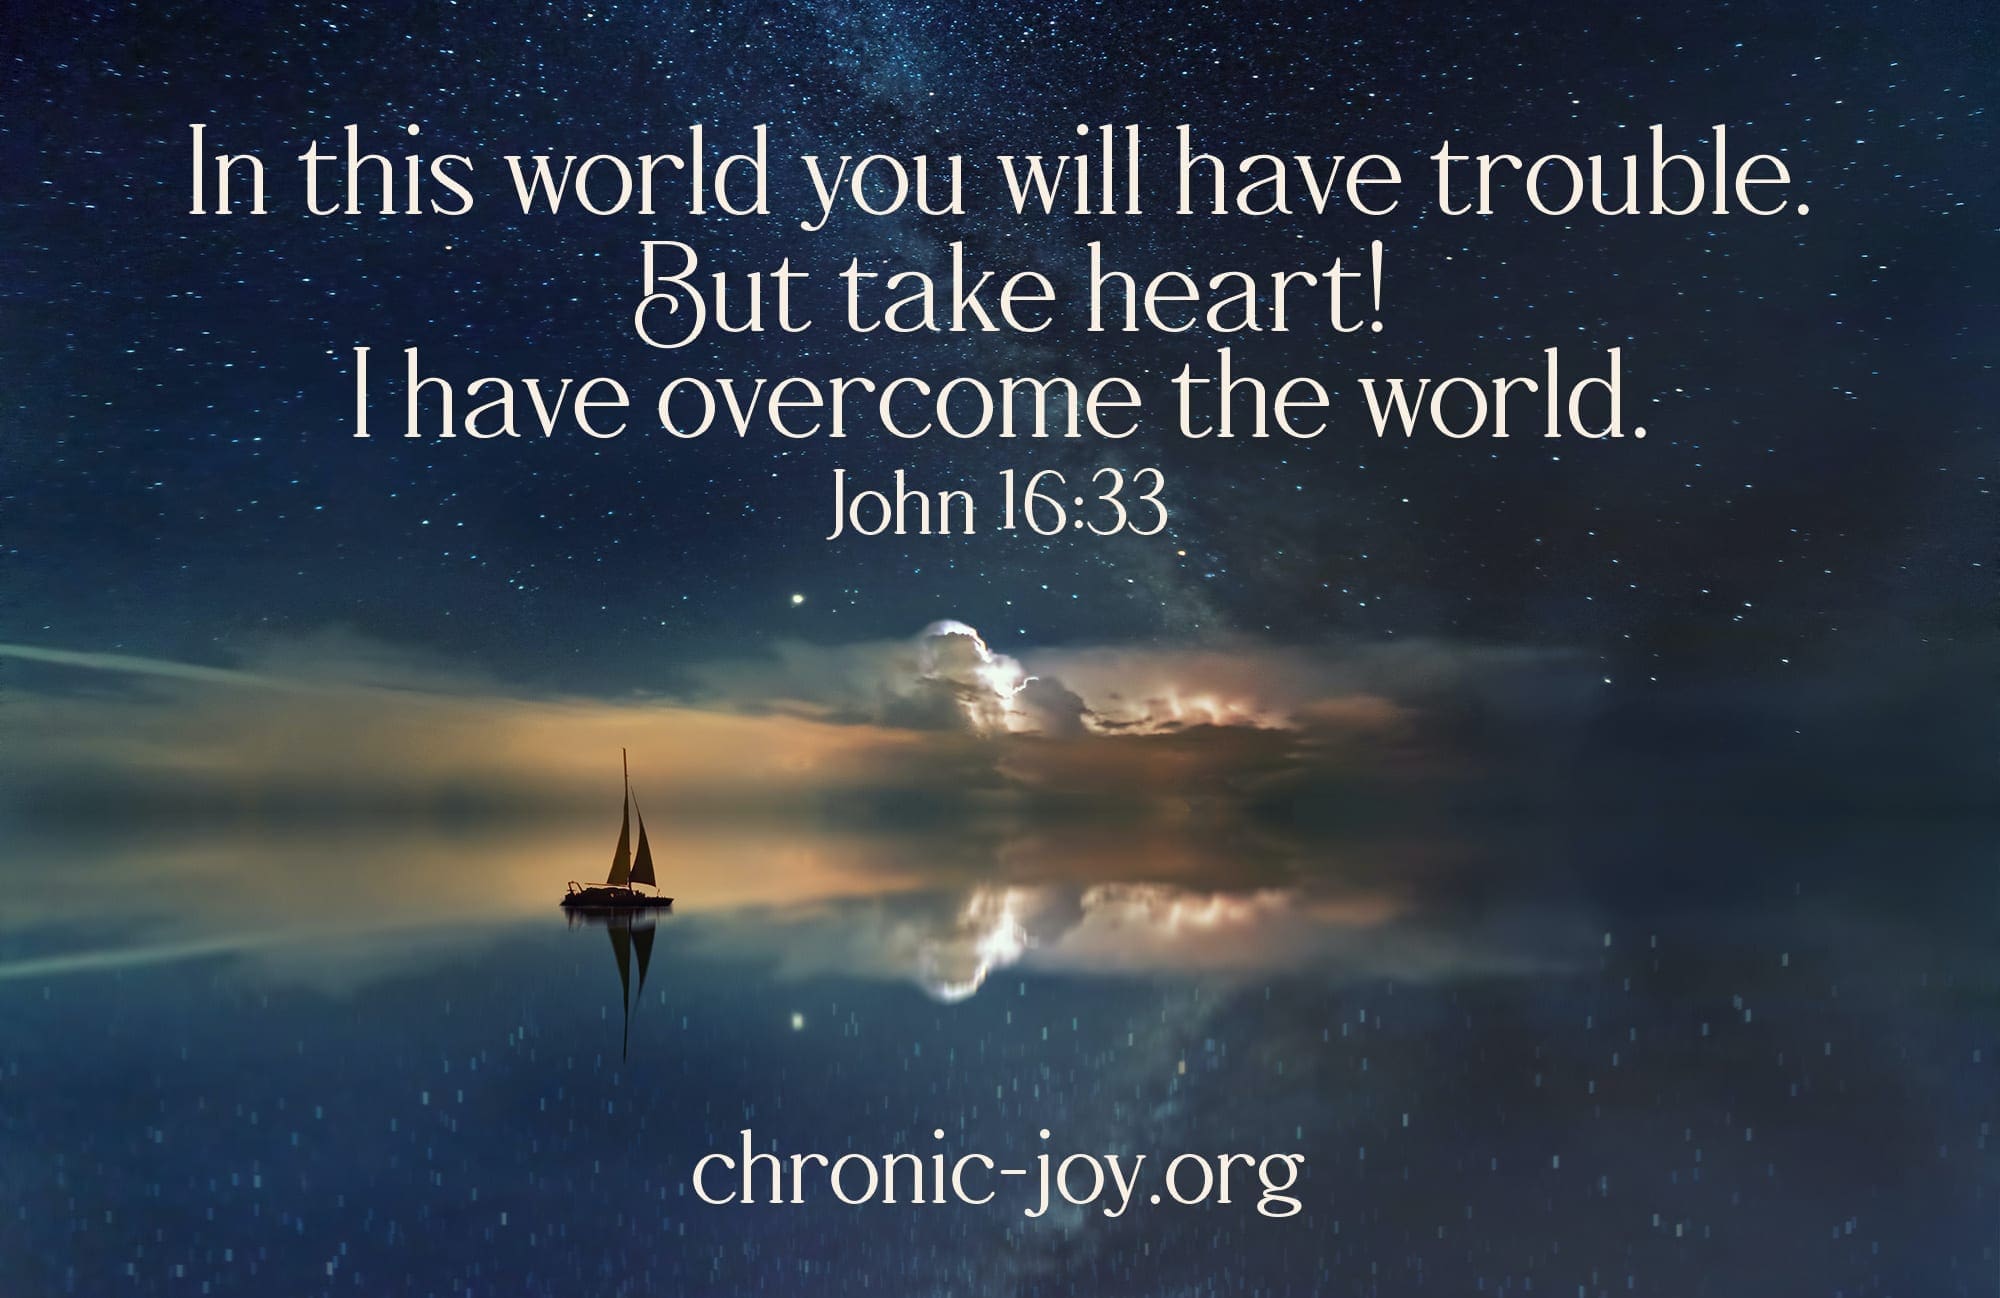 "In this world you will have trouble. But take heart! I have overcome the world." John 16:33